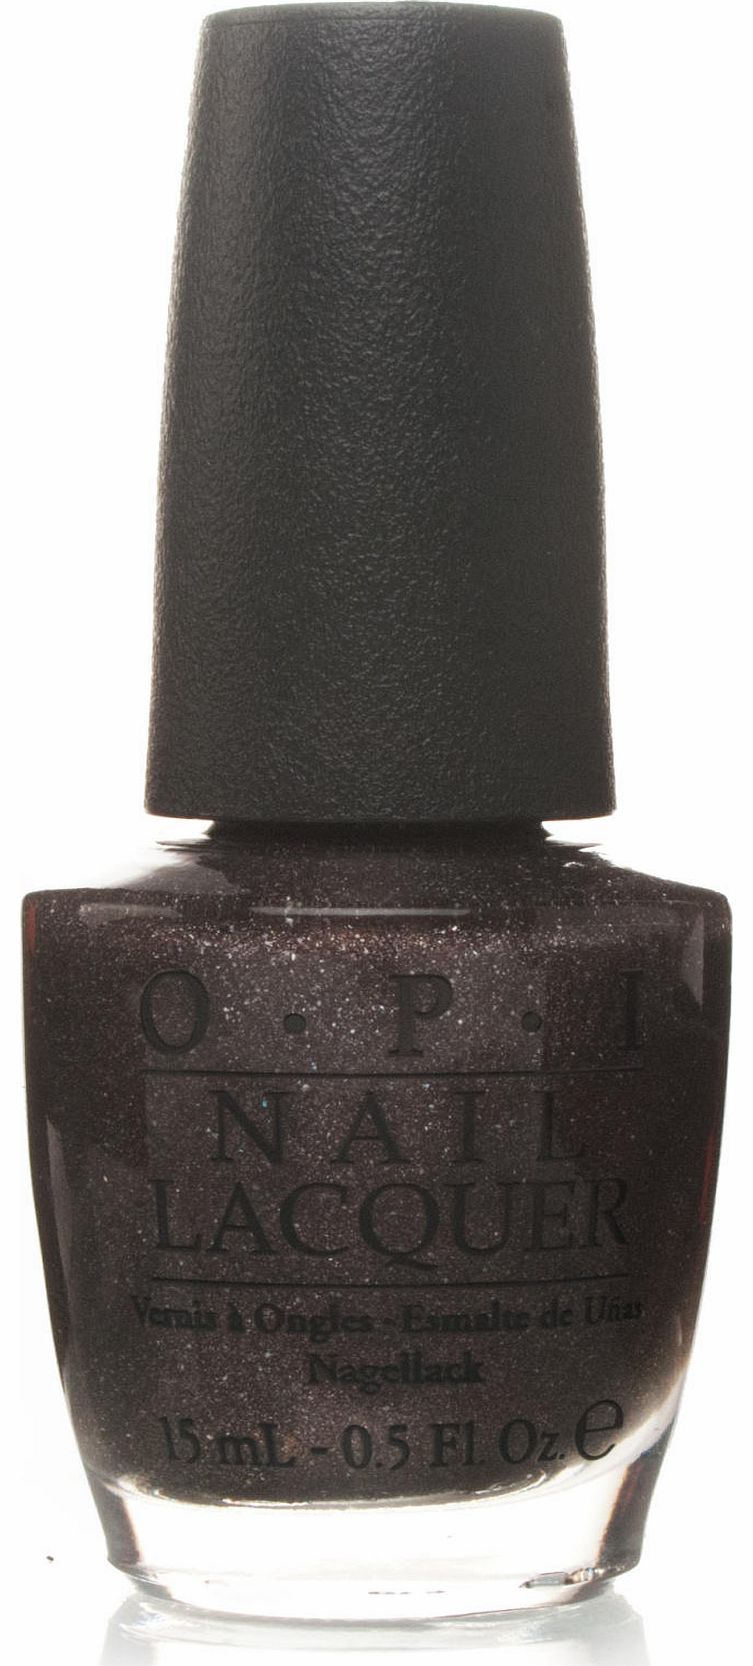 O.P.I OPI My Private Jet Nail Lacquer